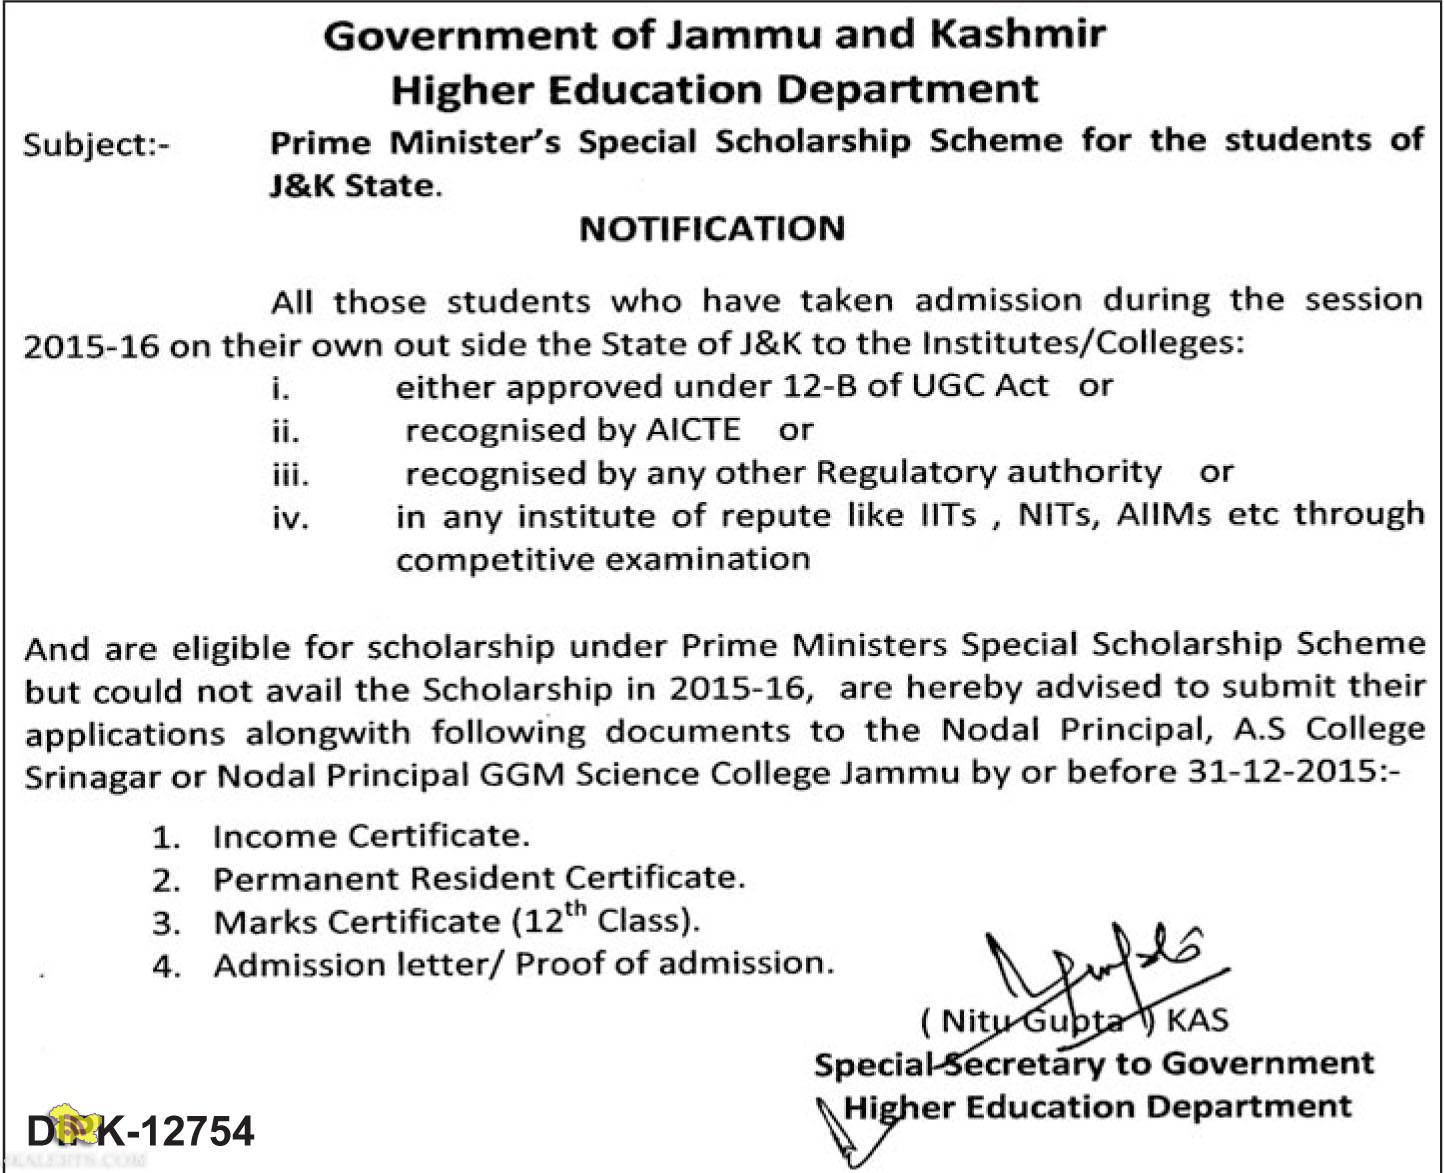 Prime Minister’s Special Scholarship Scheme for the students of J&K State